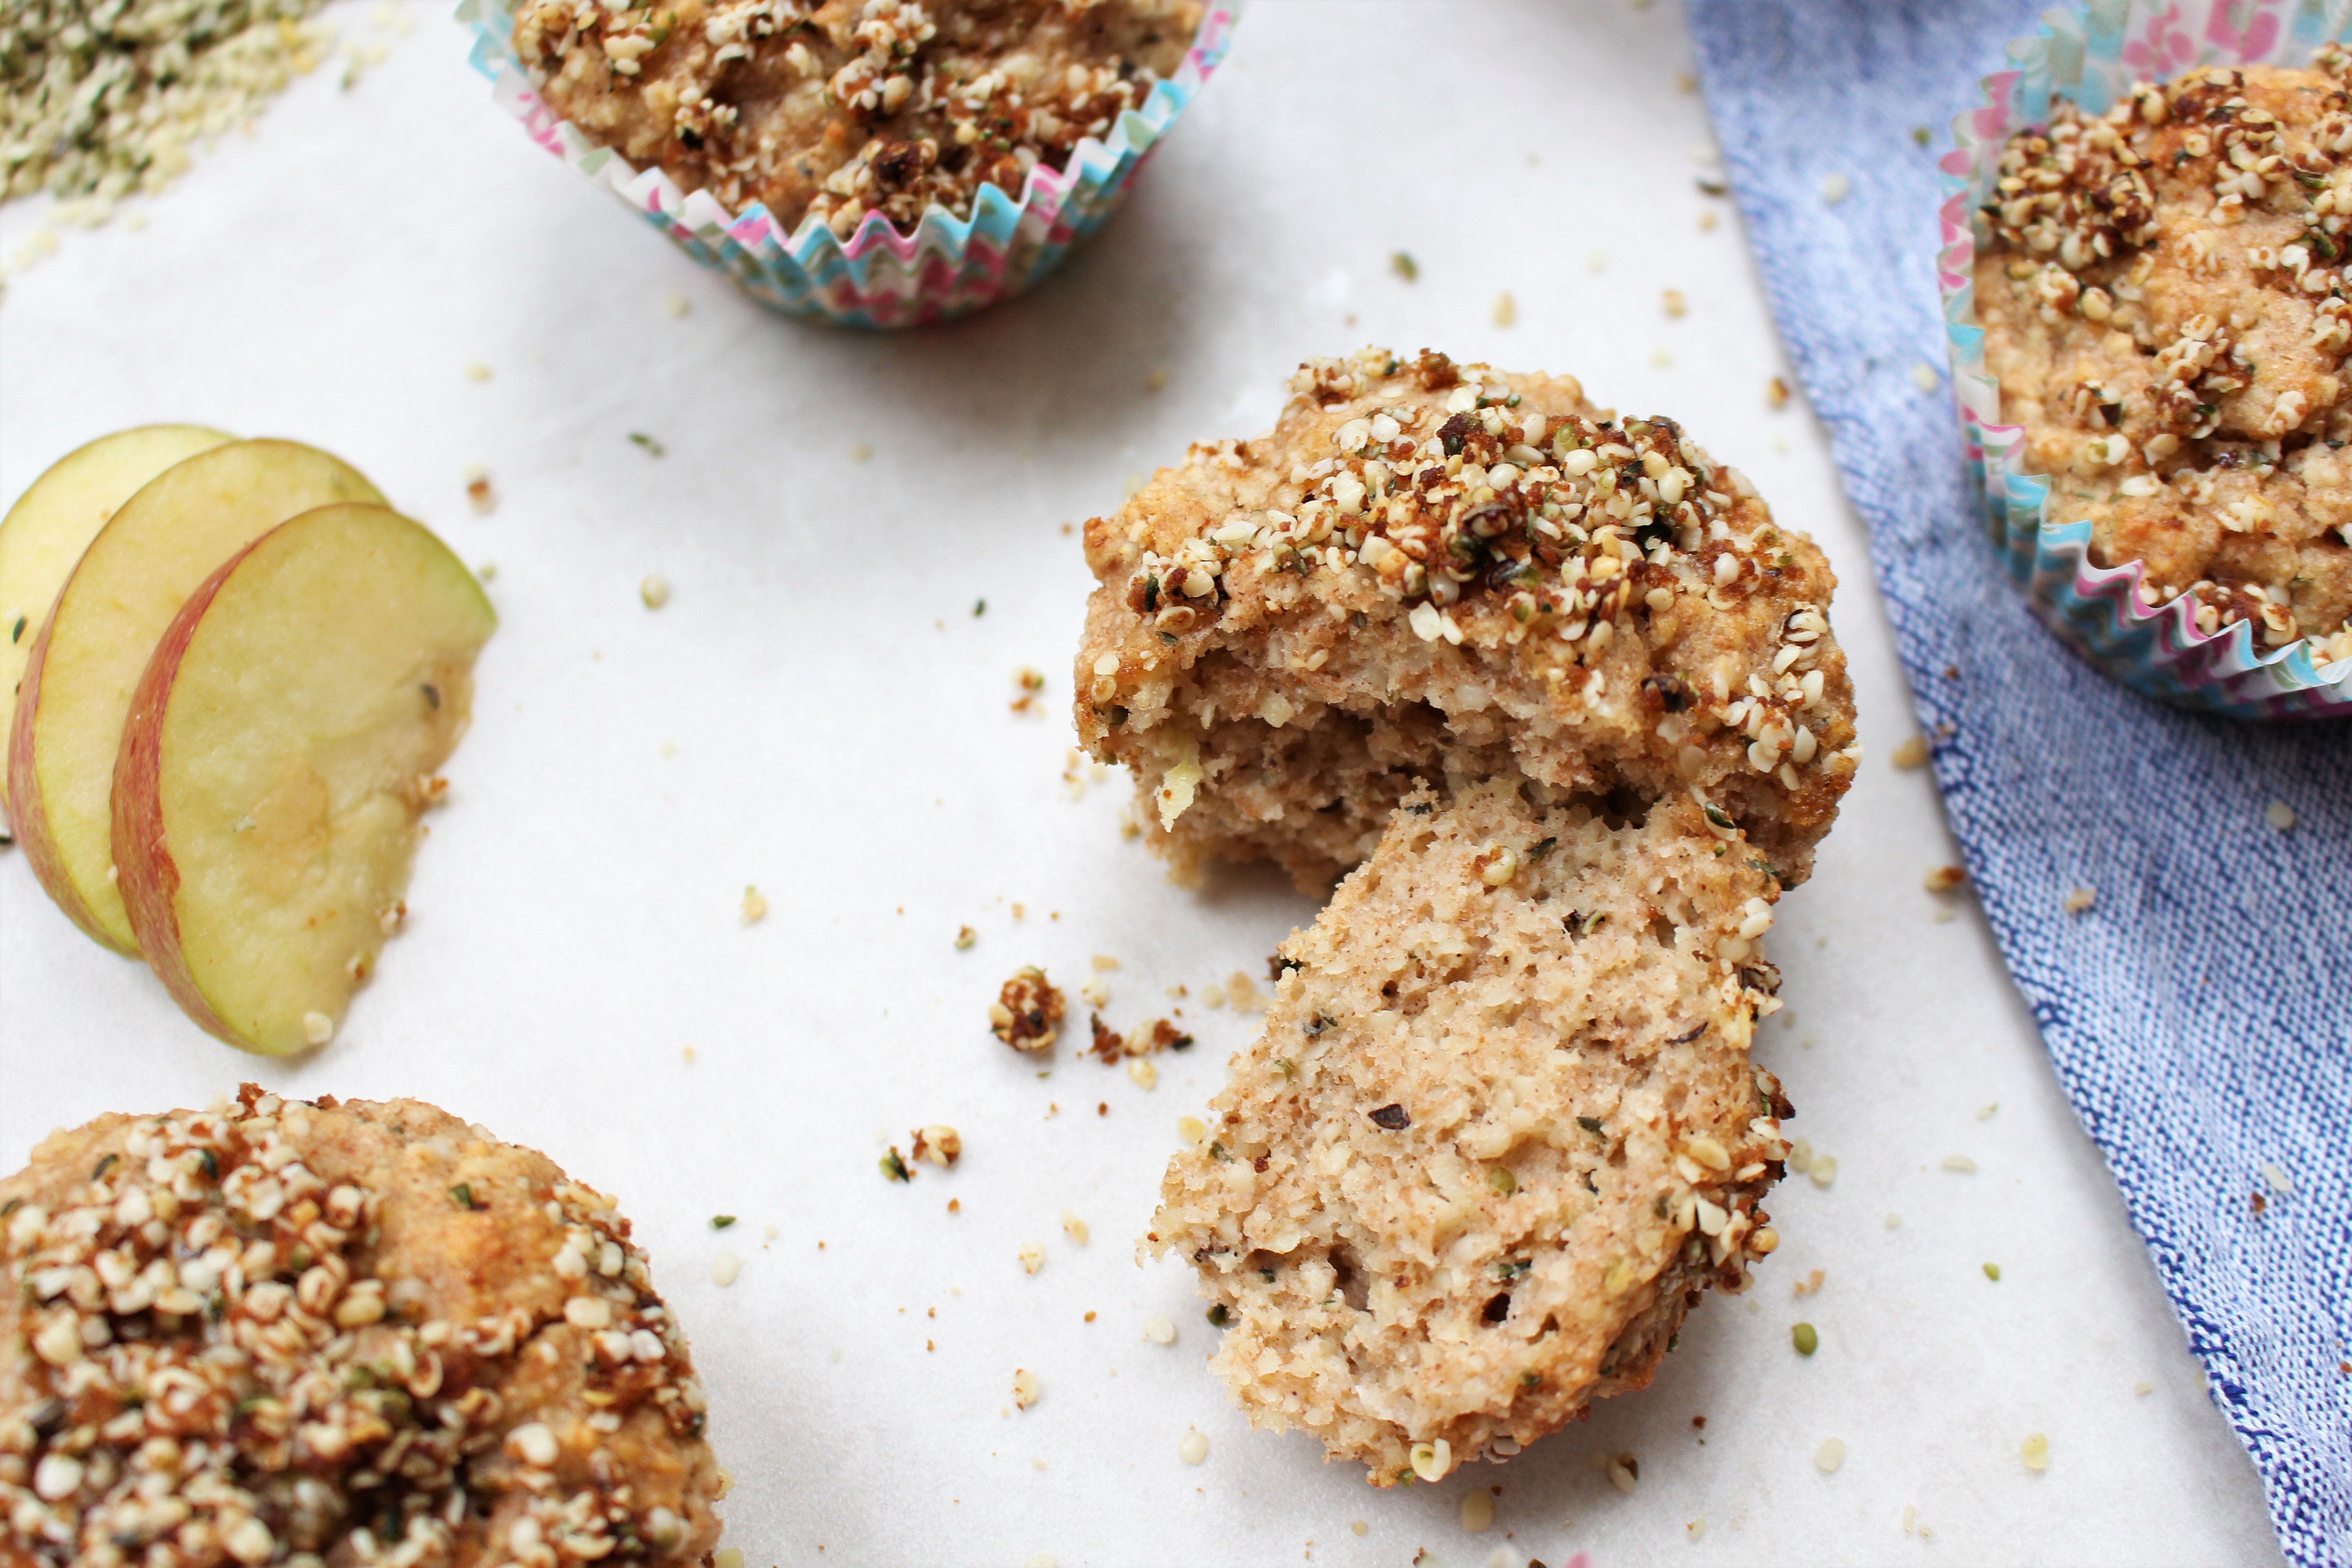 Apple and Hemp Muffins with Hemp Crumble Topping